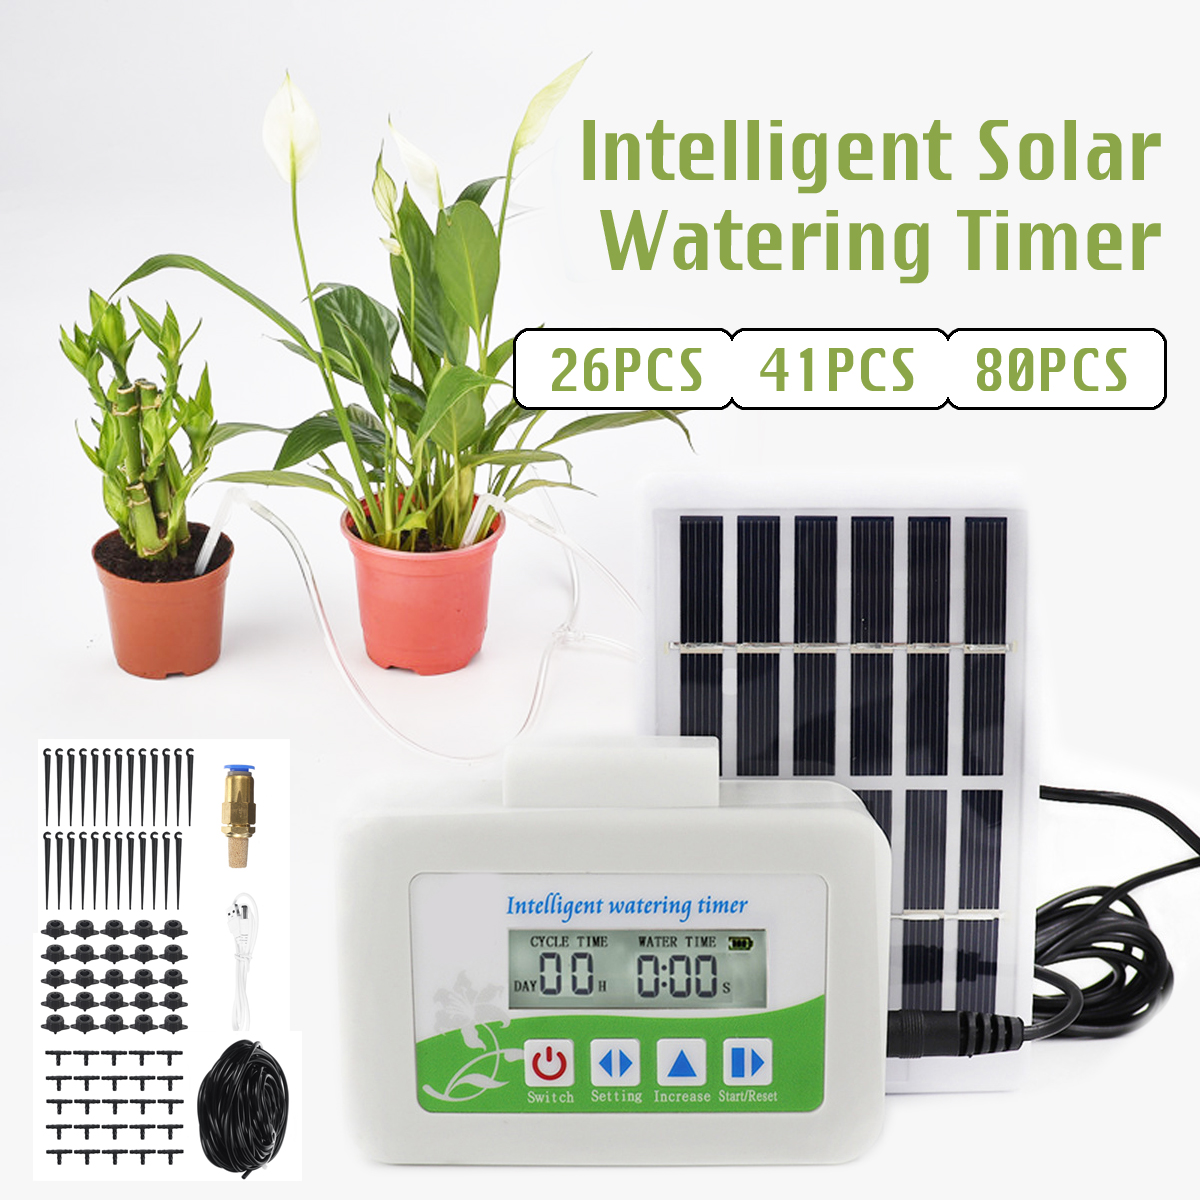 Intelligent-Watering-Timer-Automatic-Solar-Water-Controlle-Irrigation-System-Kit-1711287-4